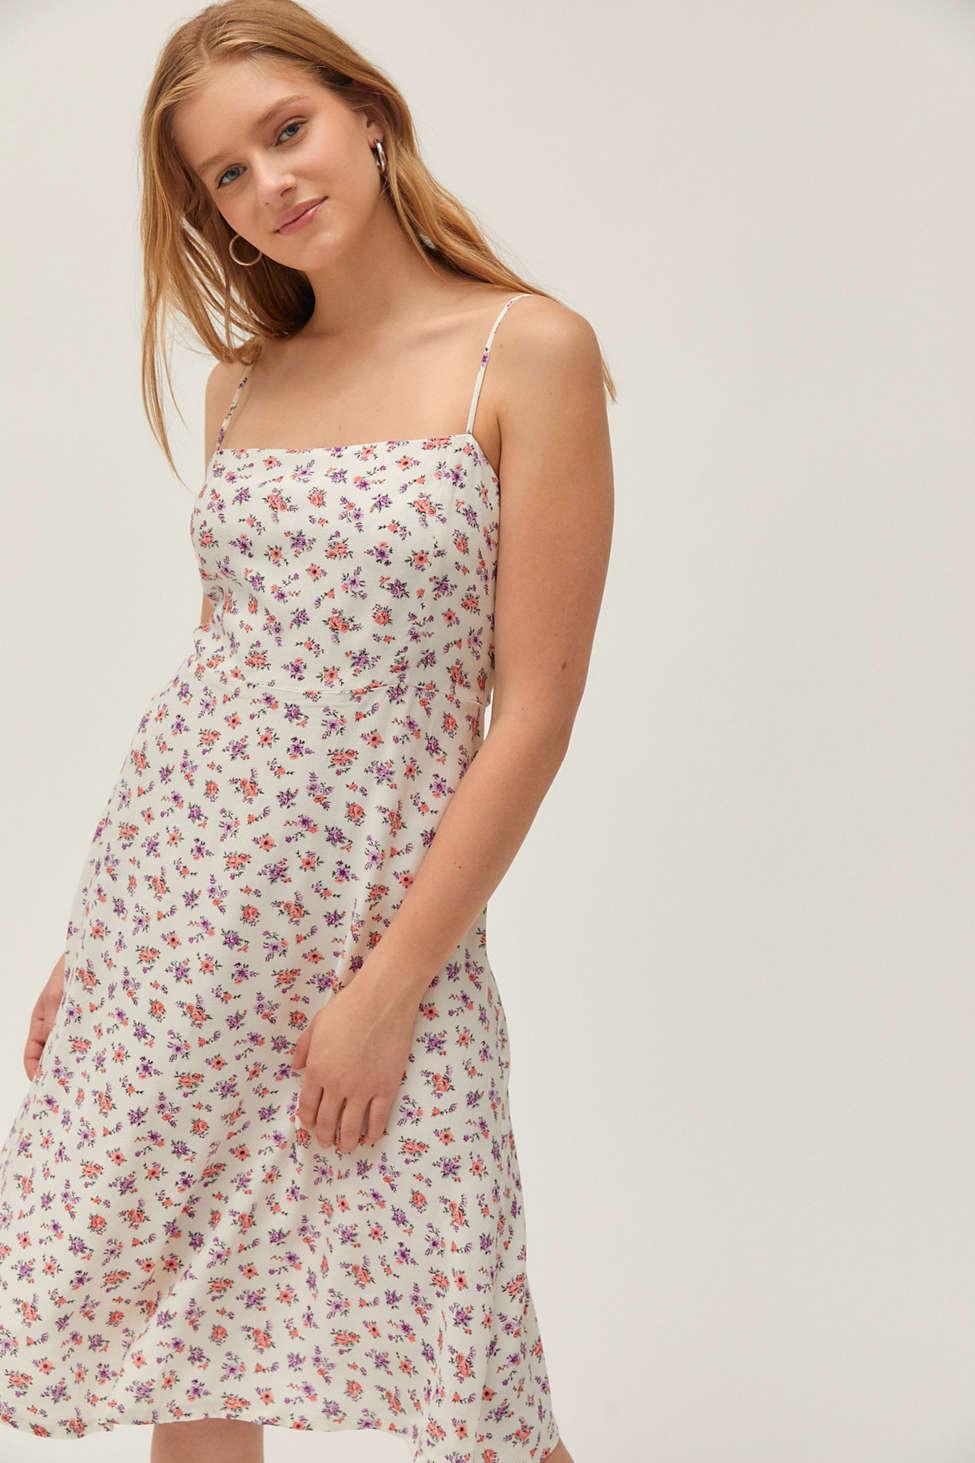 Buy > urban outfitters archive pink floral mesh midi dress > in stock